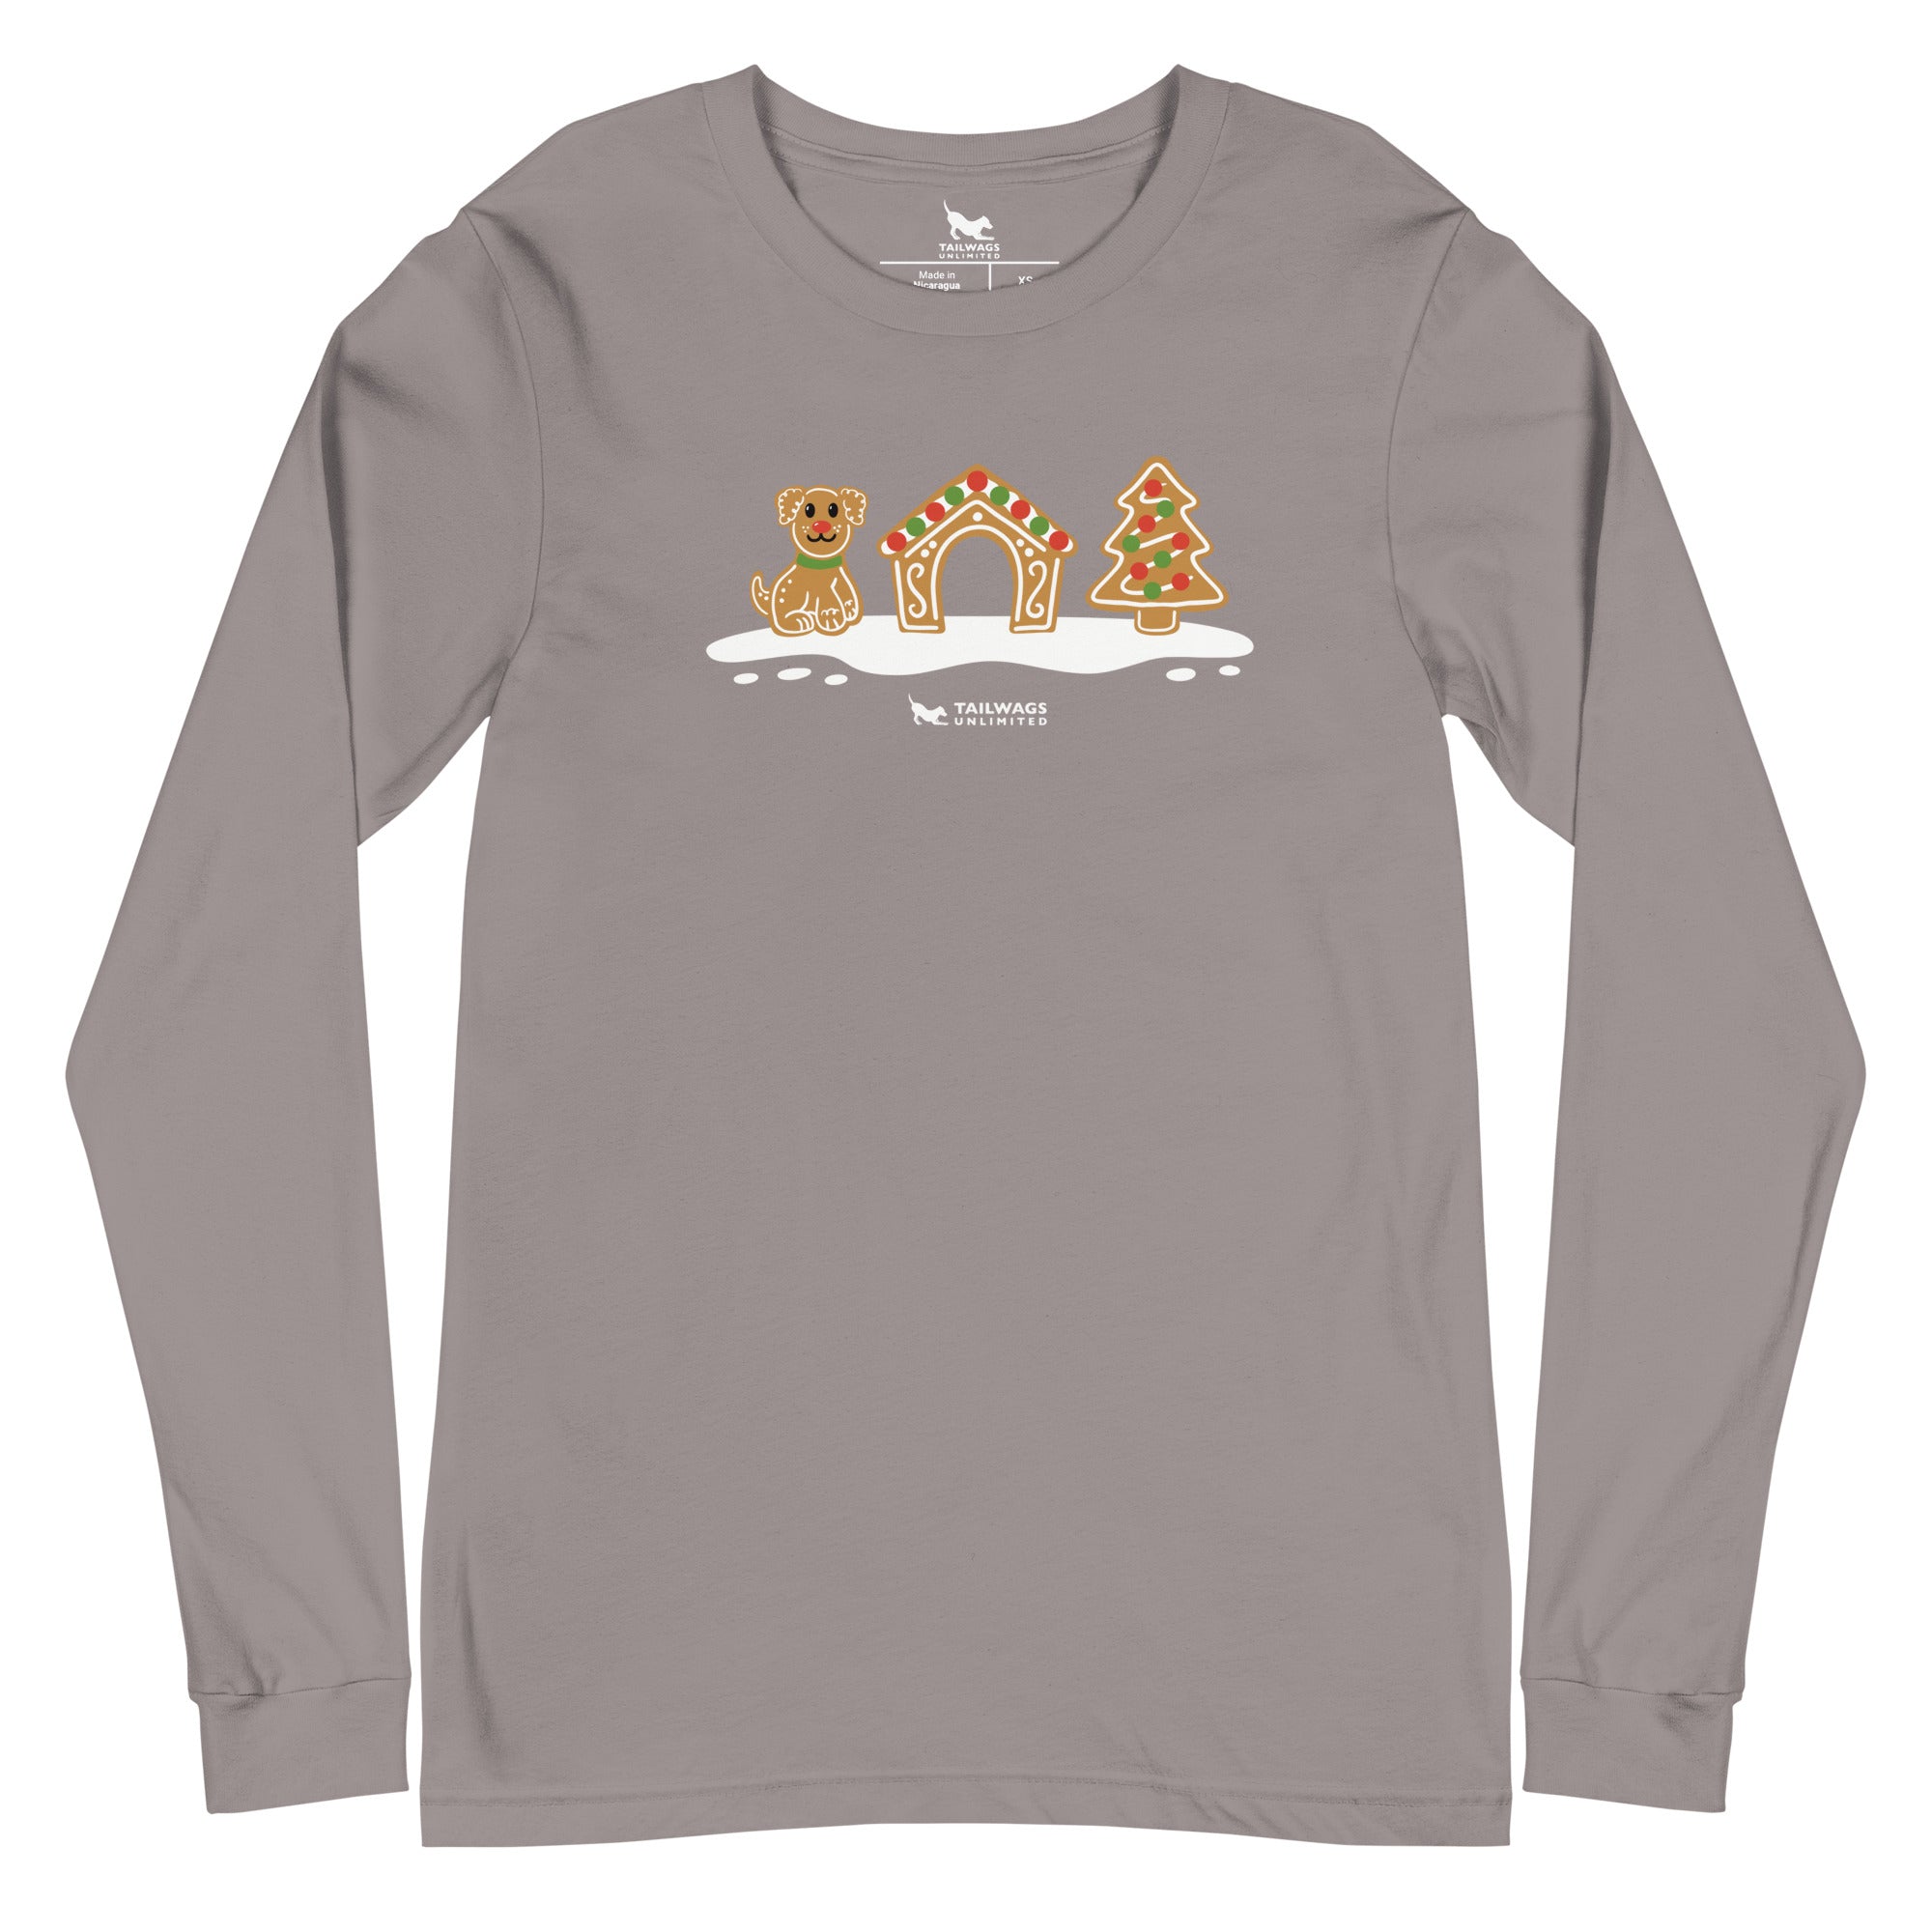 Gingerbread Doghouse Long Sleeve Tee - TAILWAGS UNLIMITED